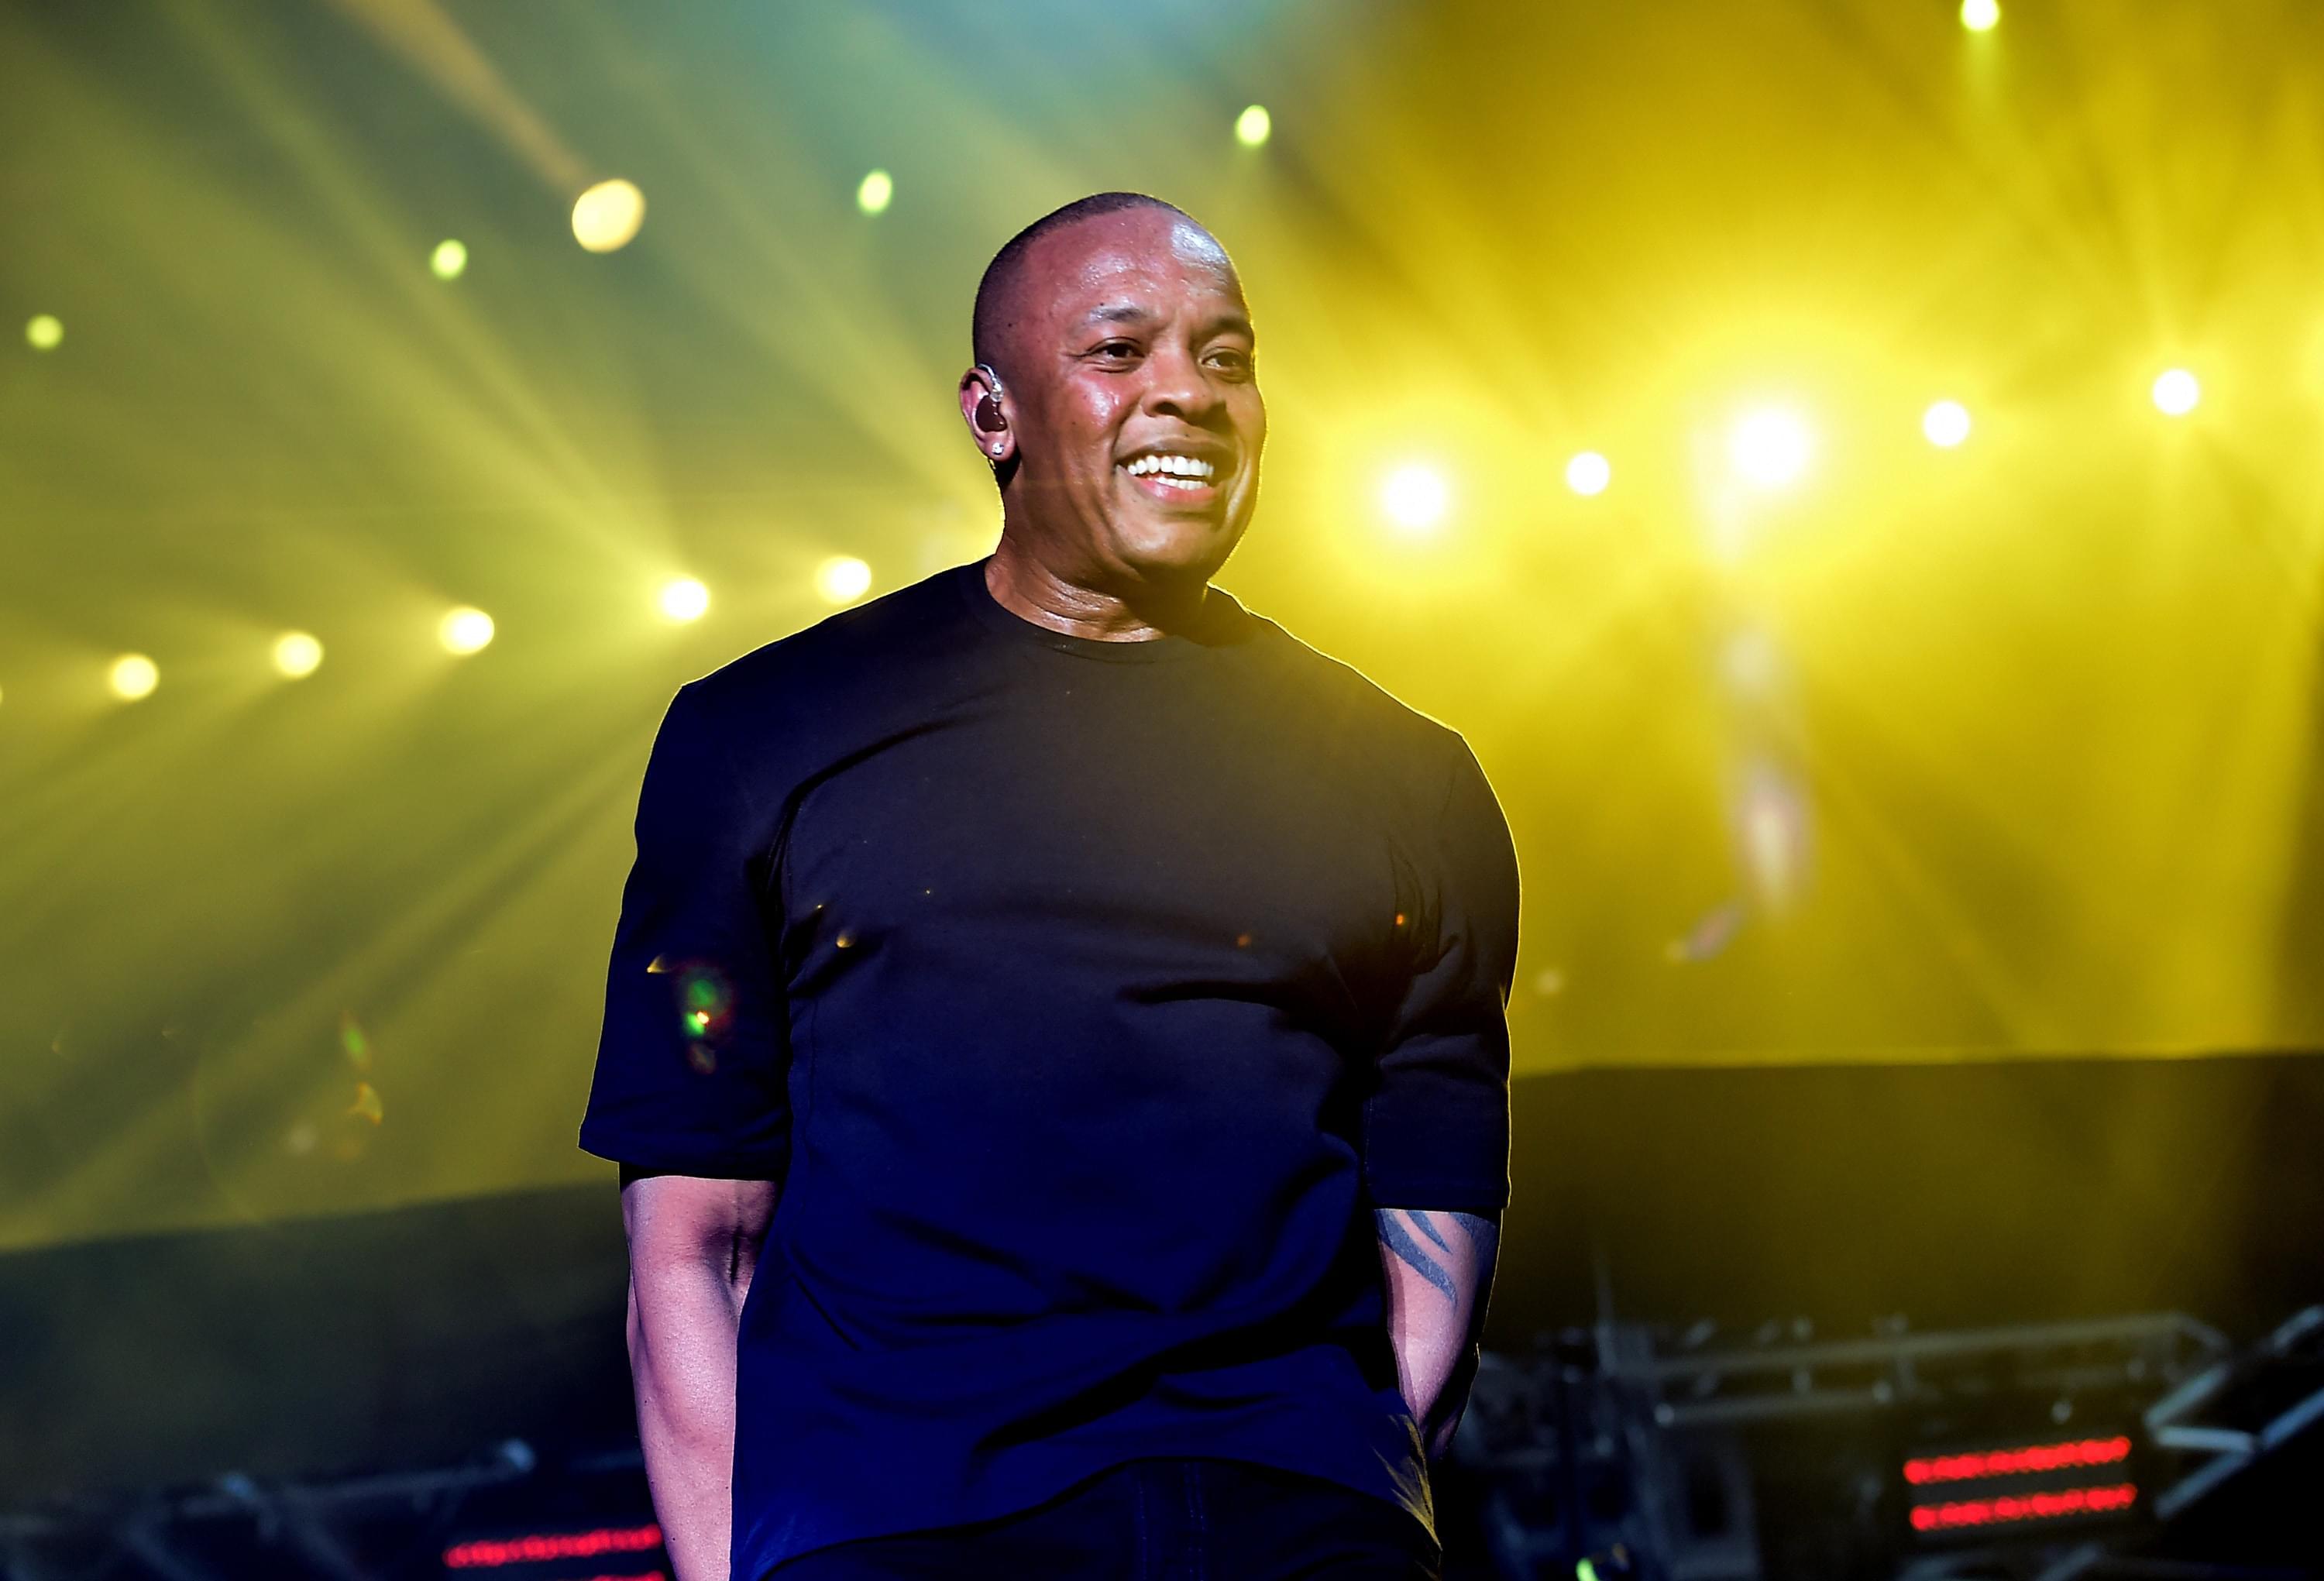 Dr. Dre Returns Home After Brain Aneurysm + Charles Barkley Says Athletes Need Priority Vaccines